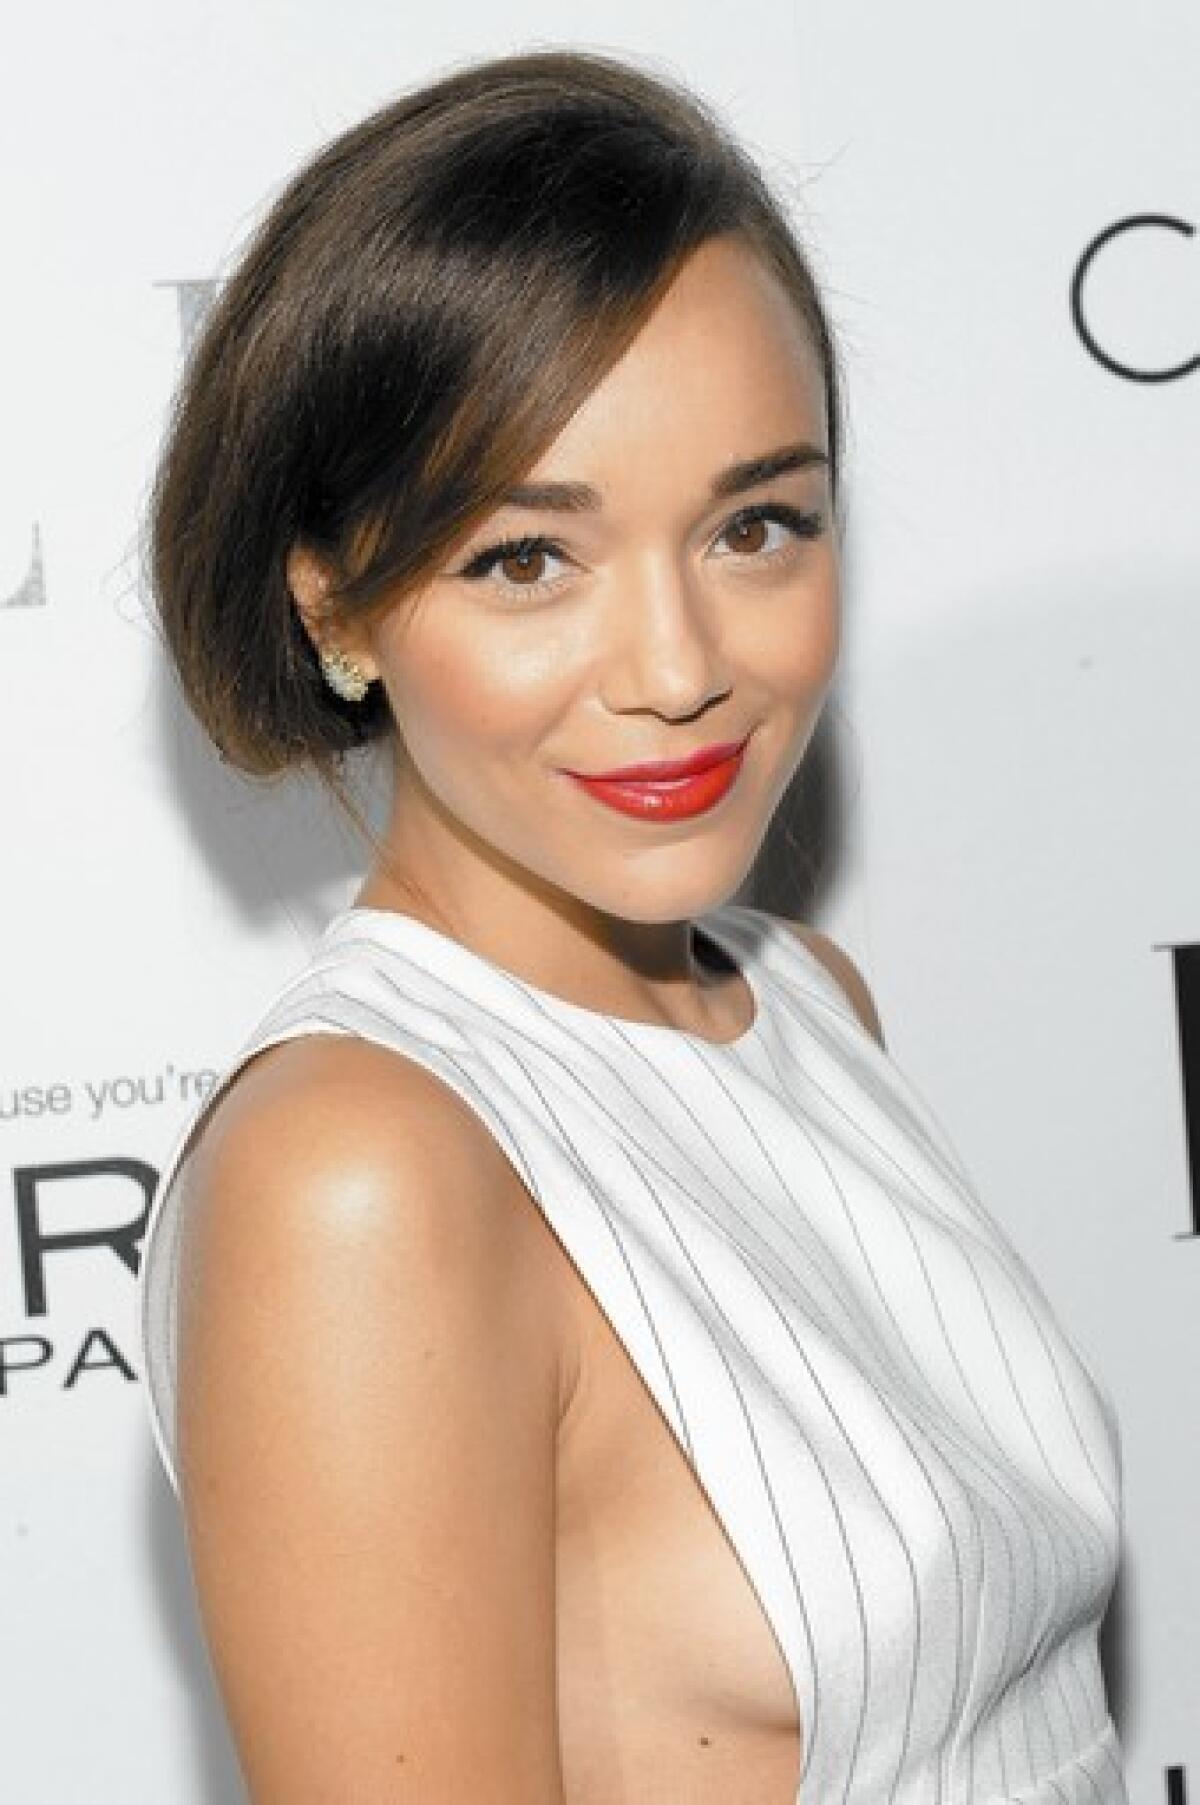 Ashley Madekwe, who has long hair, created a stir with her tucked-up "Fauxb" hairdo at an October event.